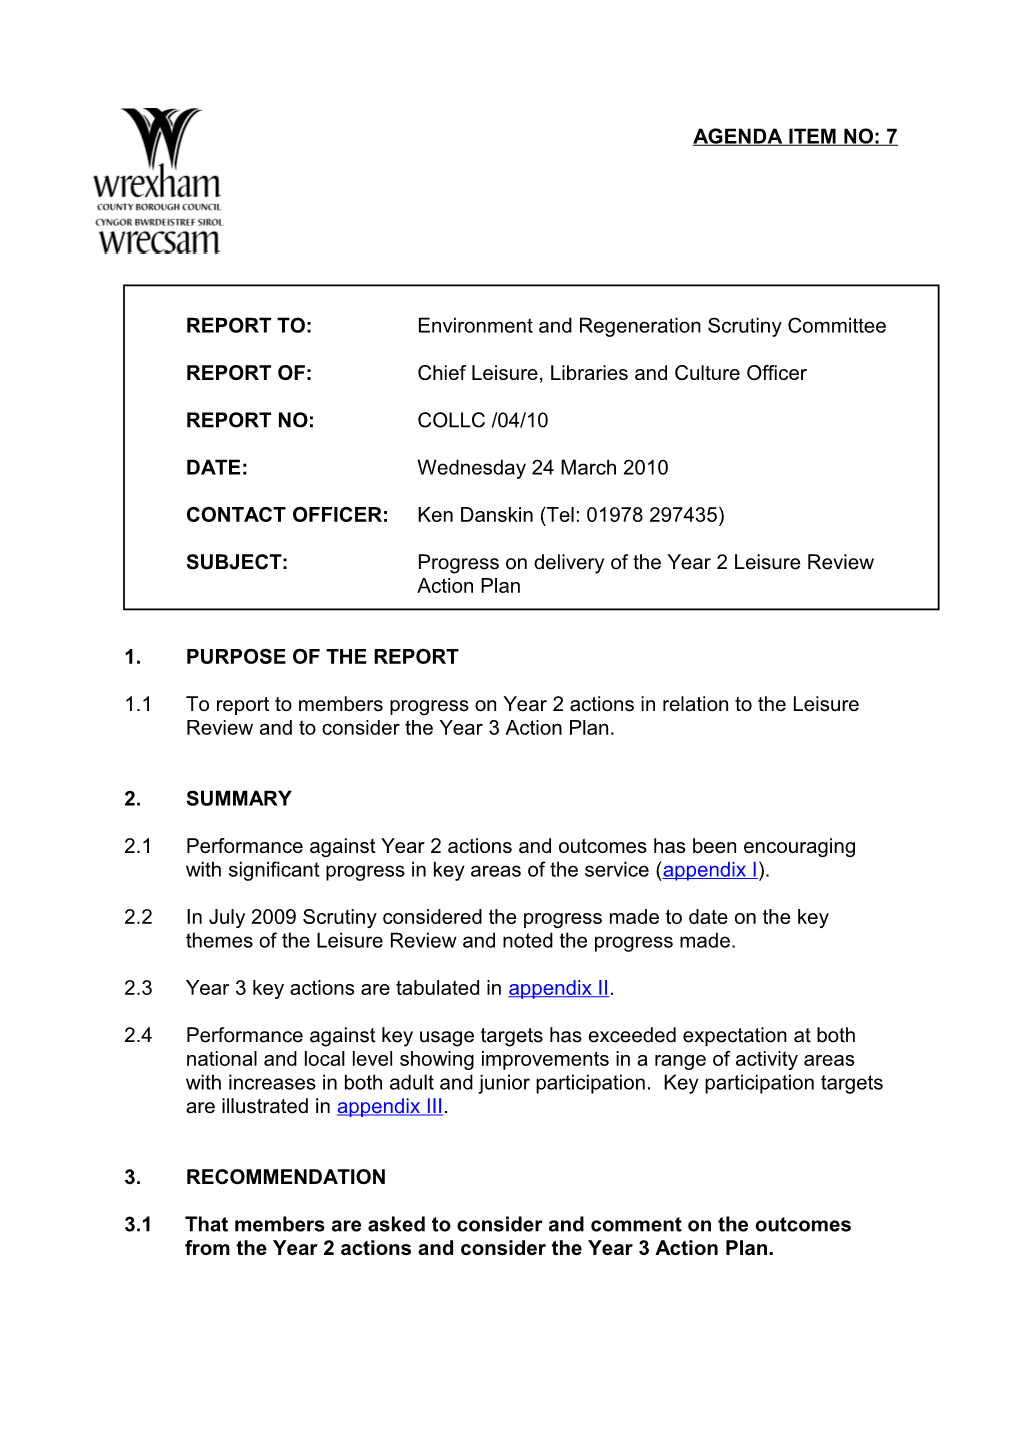 24/03/2010 Report : Environment and Regeneration Scrutiny Committee